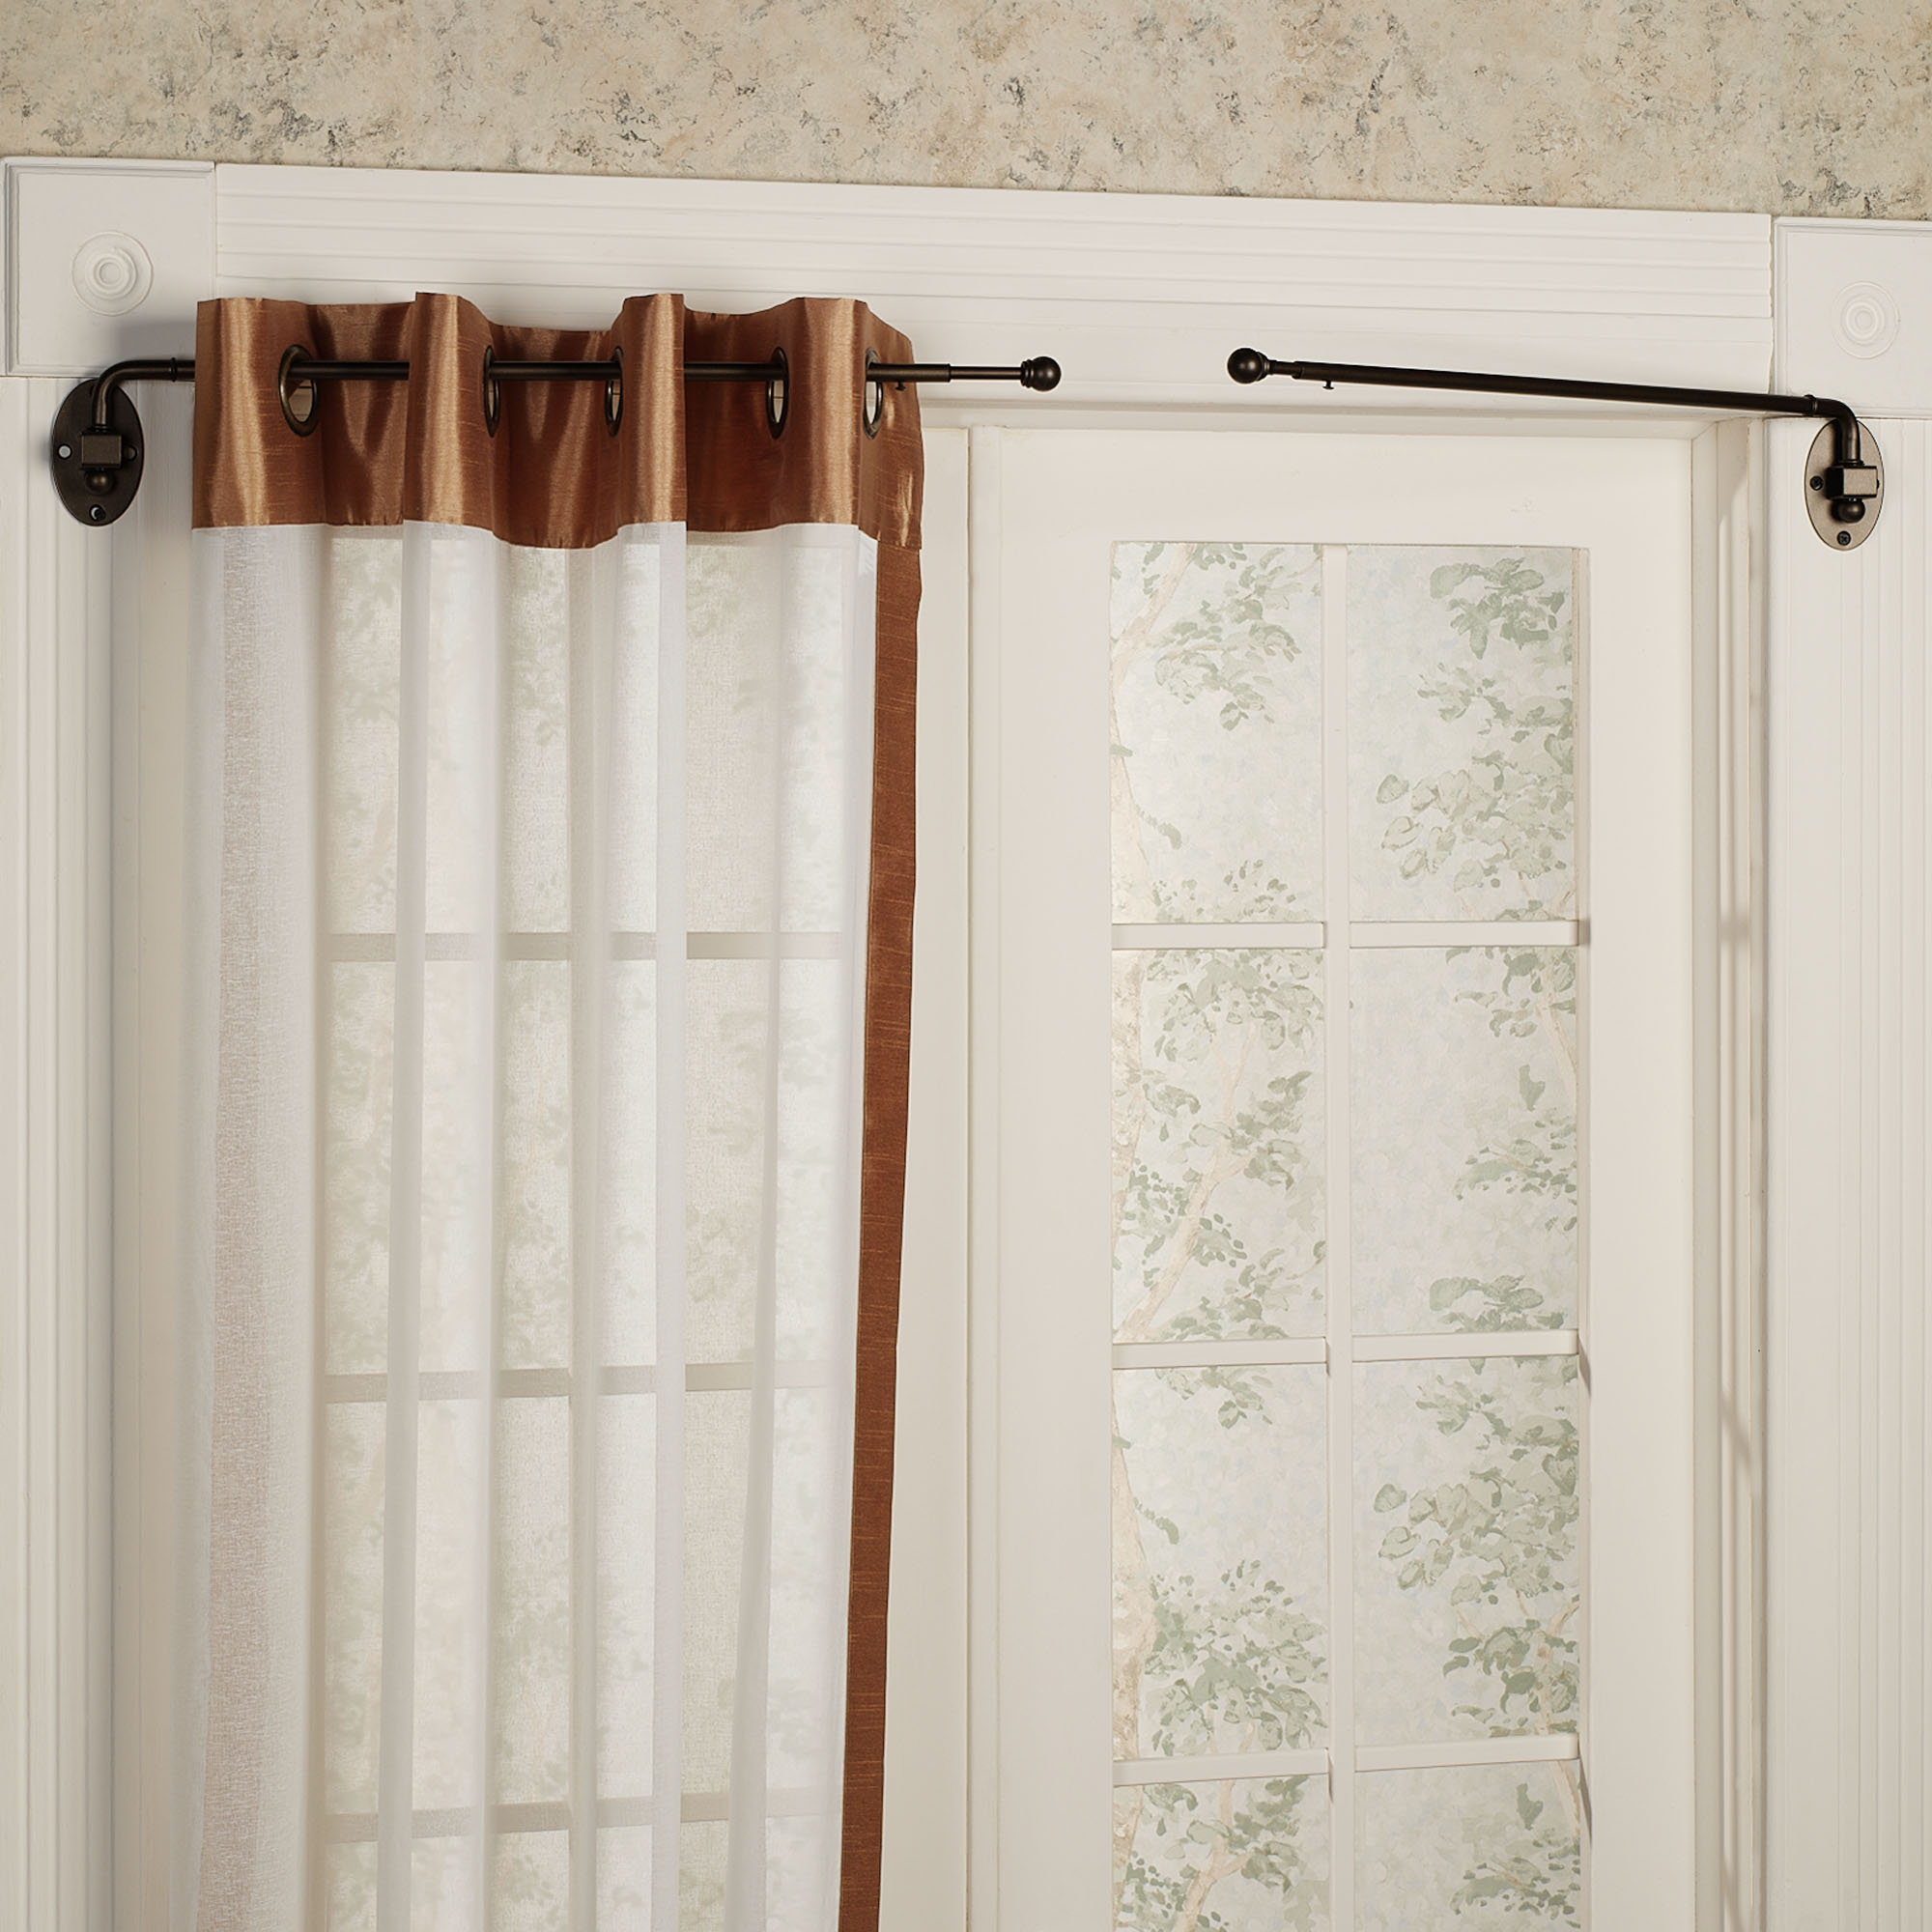 How To Make A Swing Arm Curtain Rod Decorate a Curtain Rod